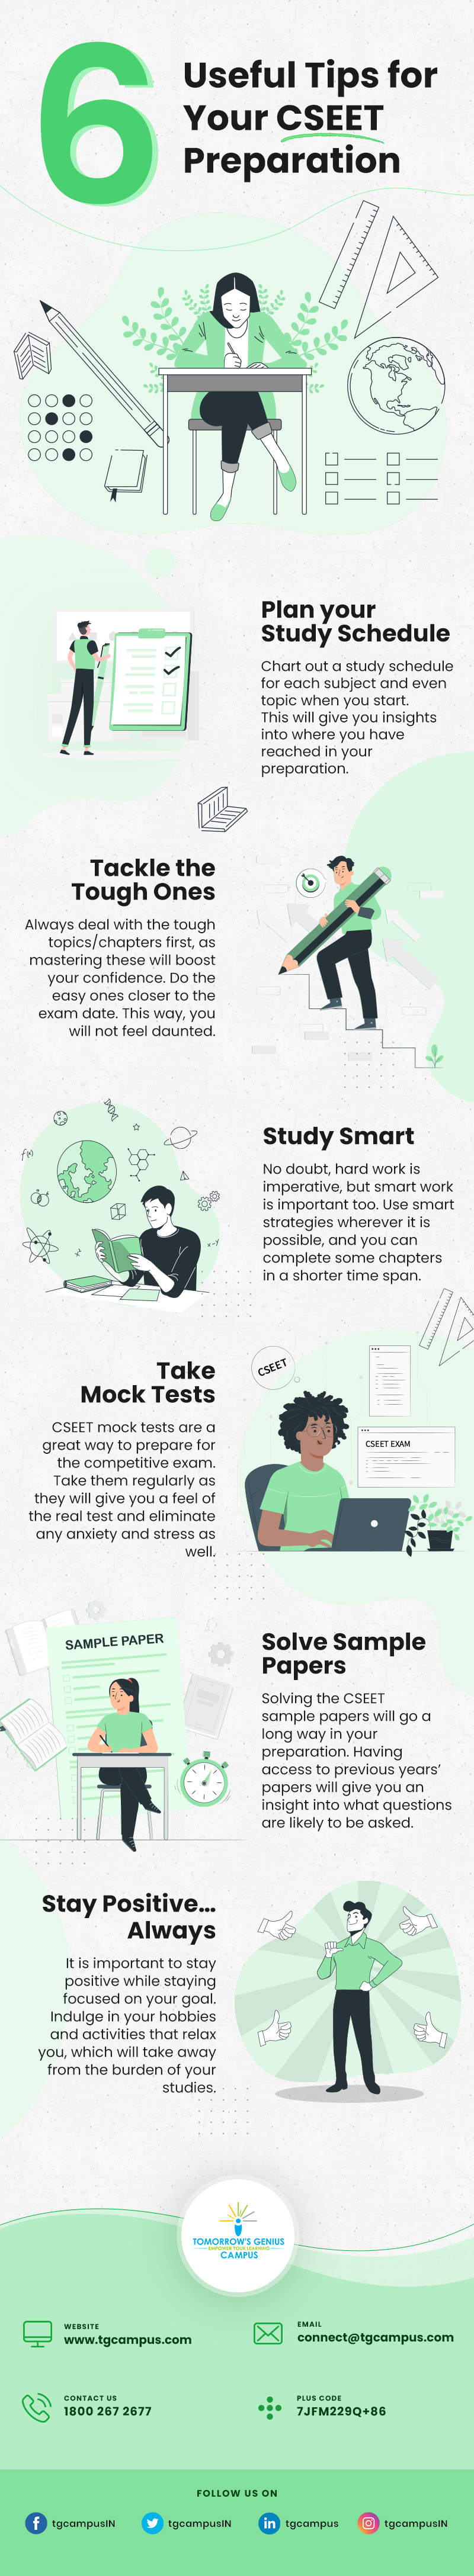 6 Tips to clear CSEET exam - Infographic